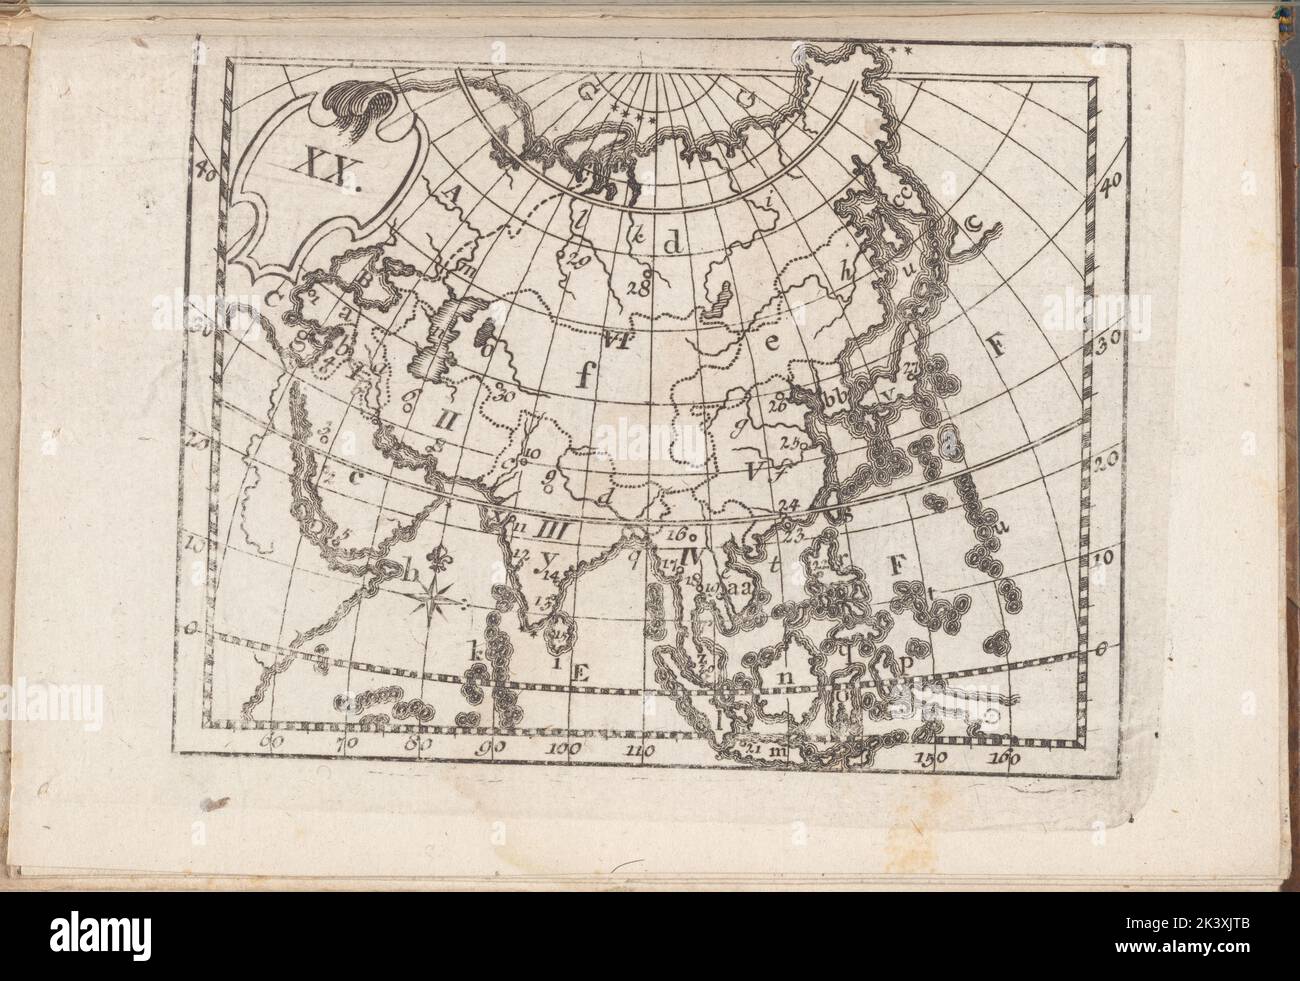 Atlas des enfans..., XX Dilthey, Philipp Heinrich, 1723-1781. Cartographic. Maps. 1768. Rare Book Division. Geography Stock Photo